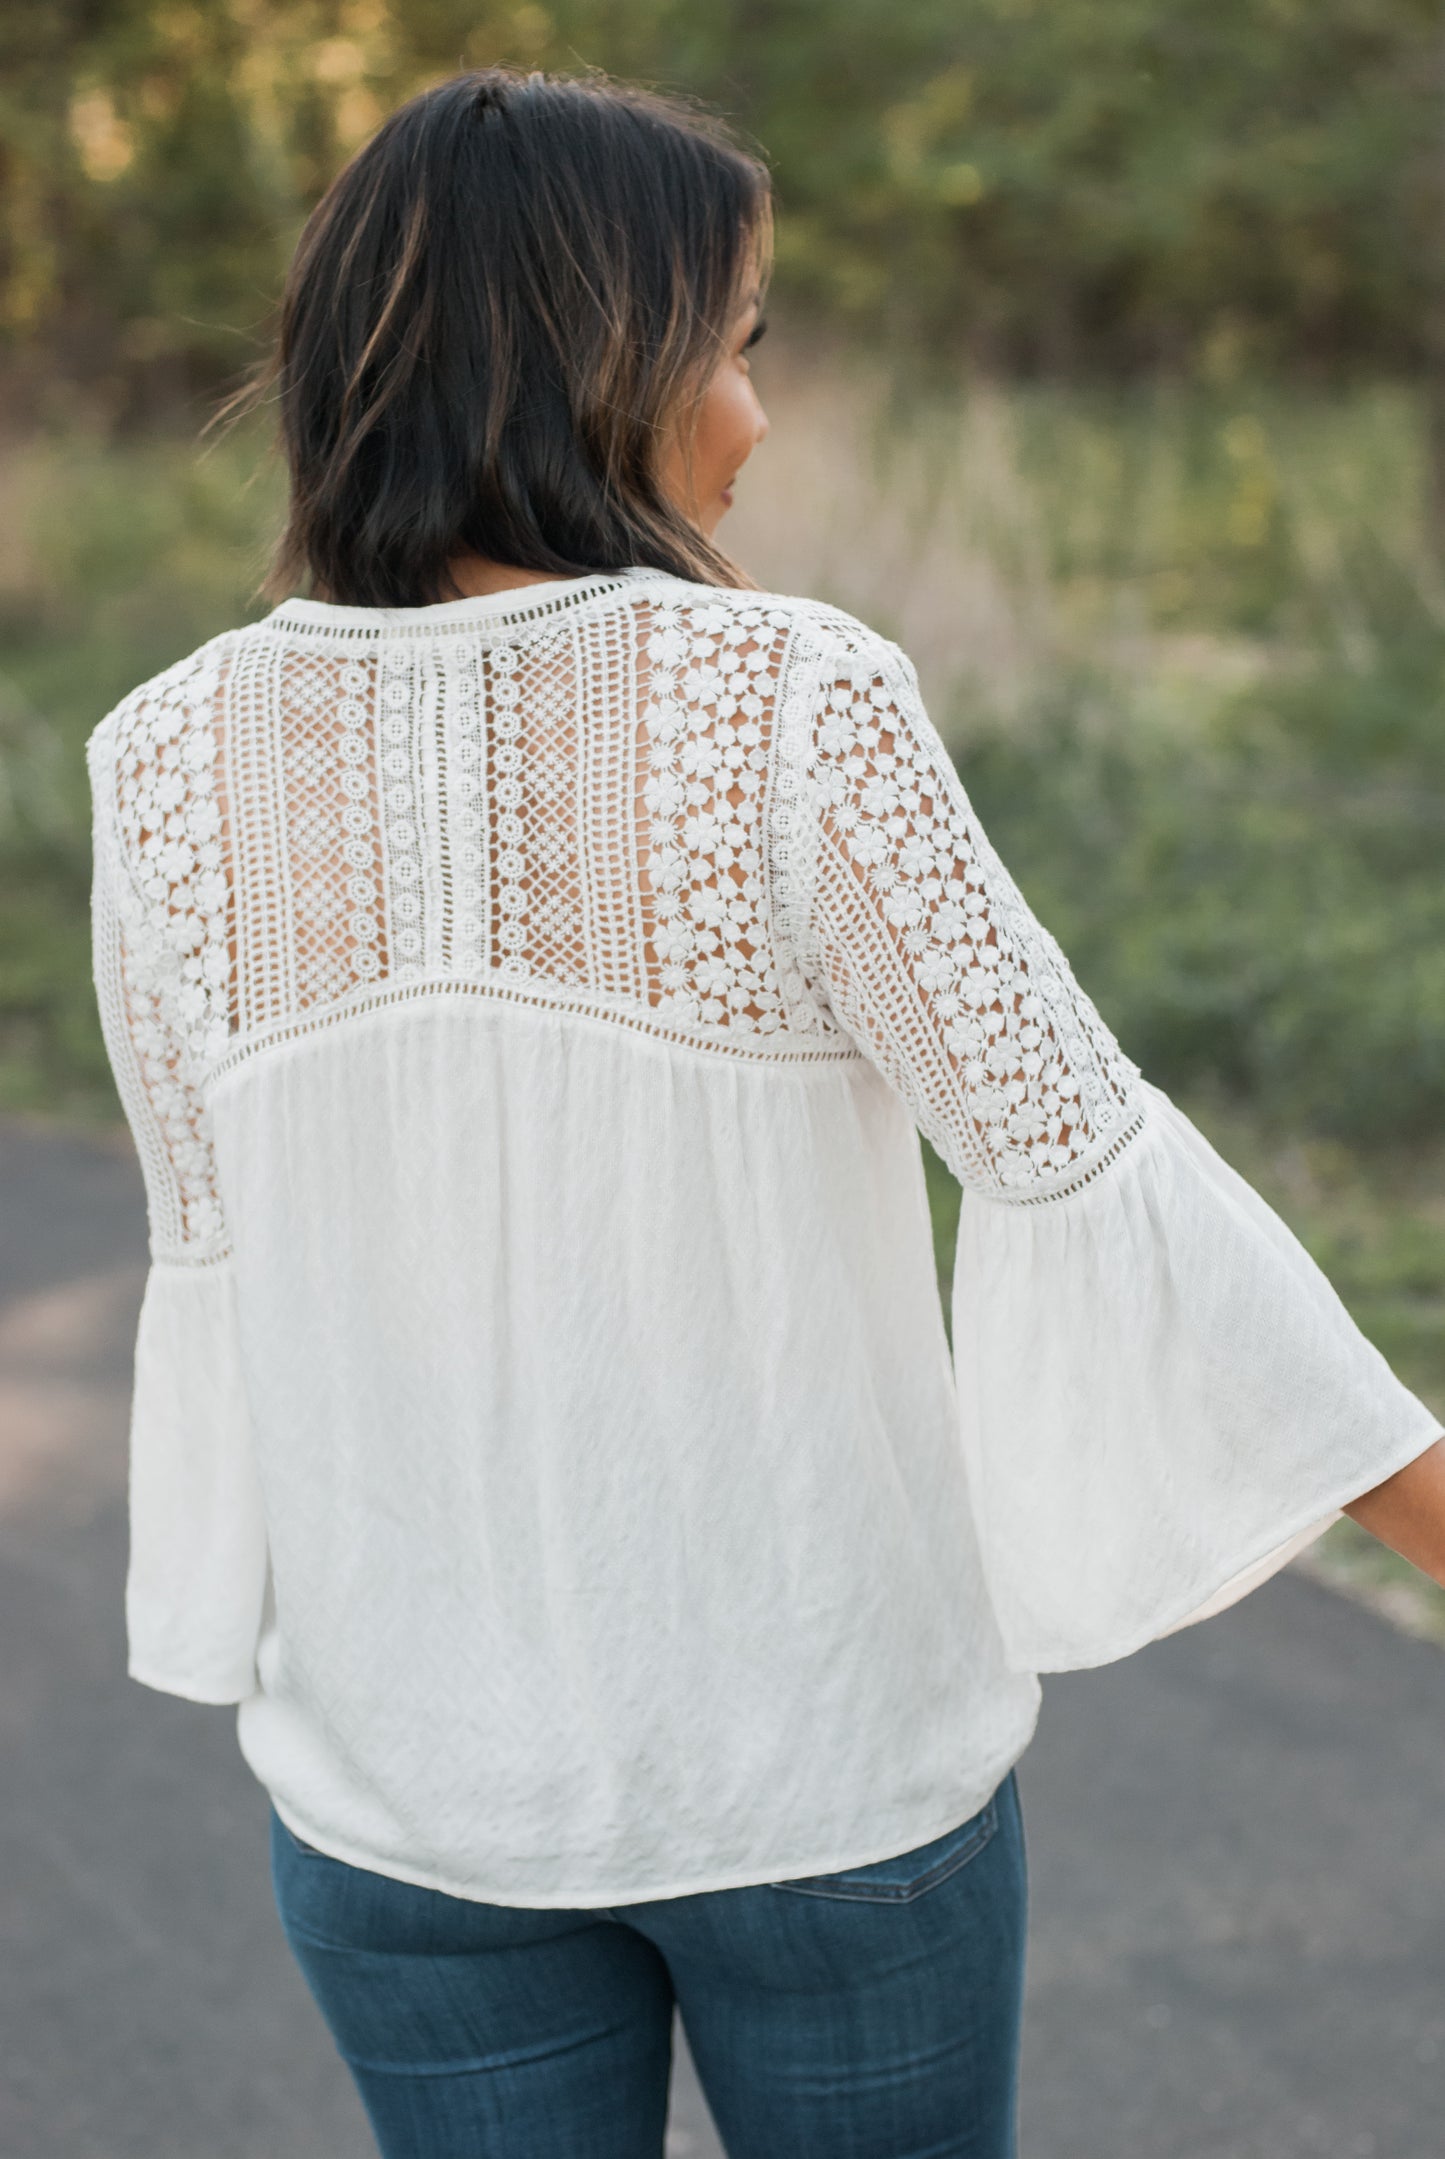 Presley Lace Top in White